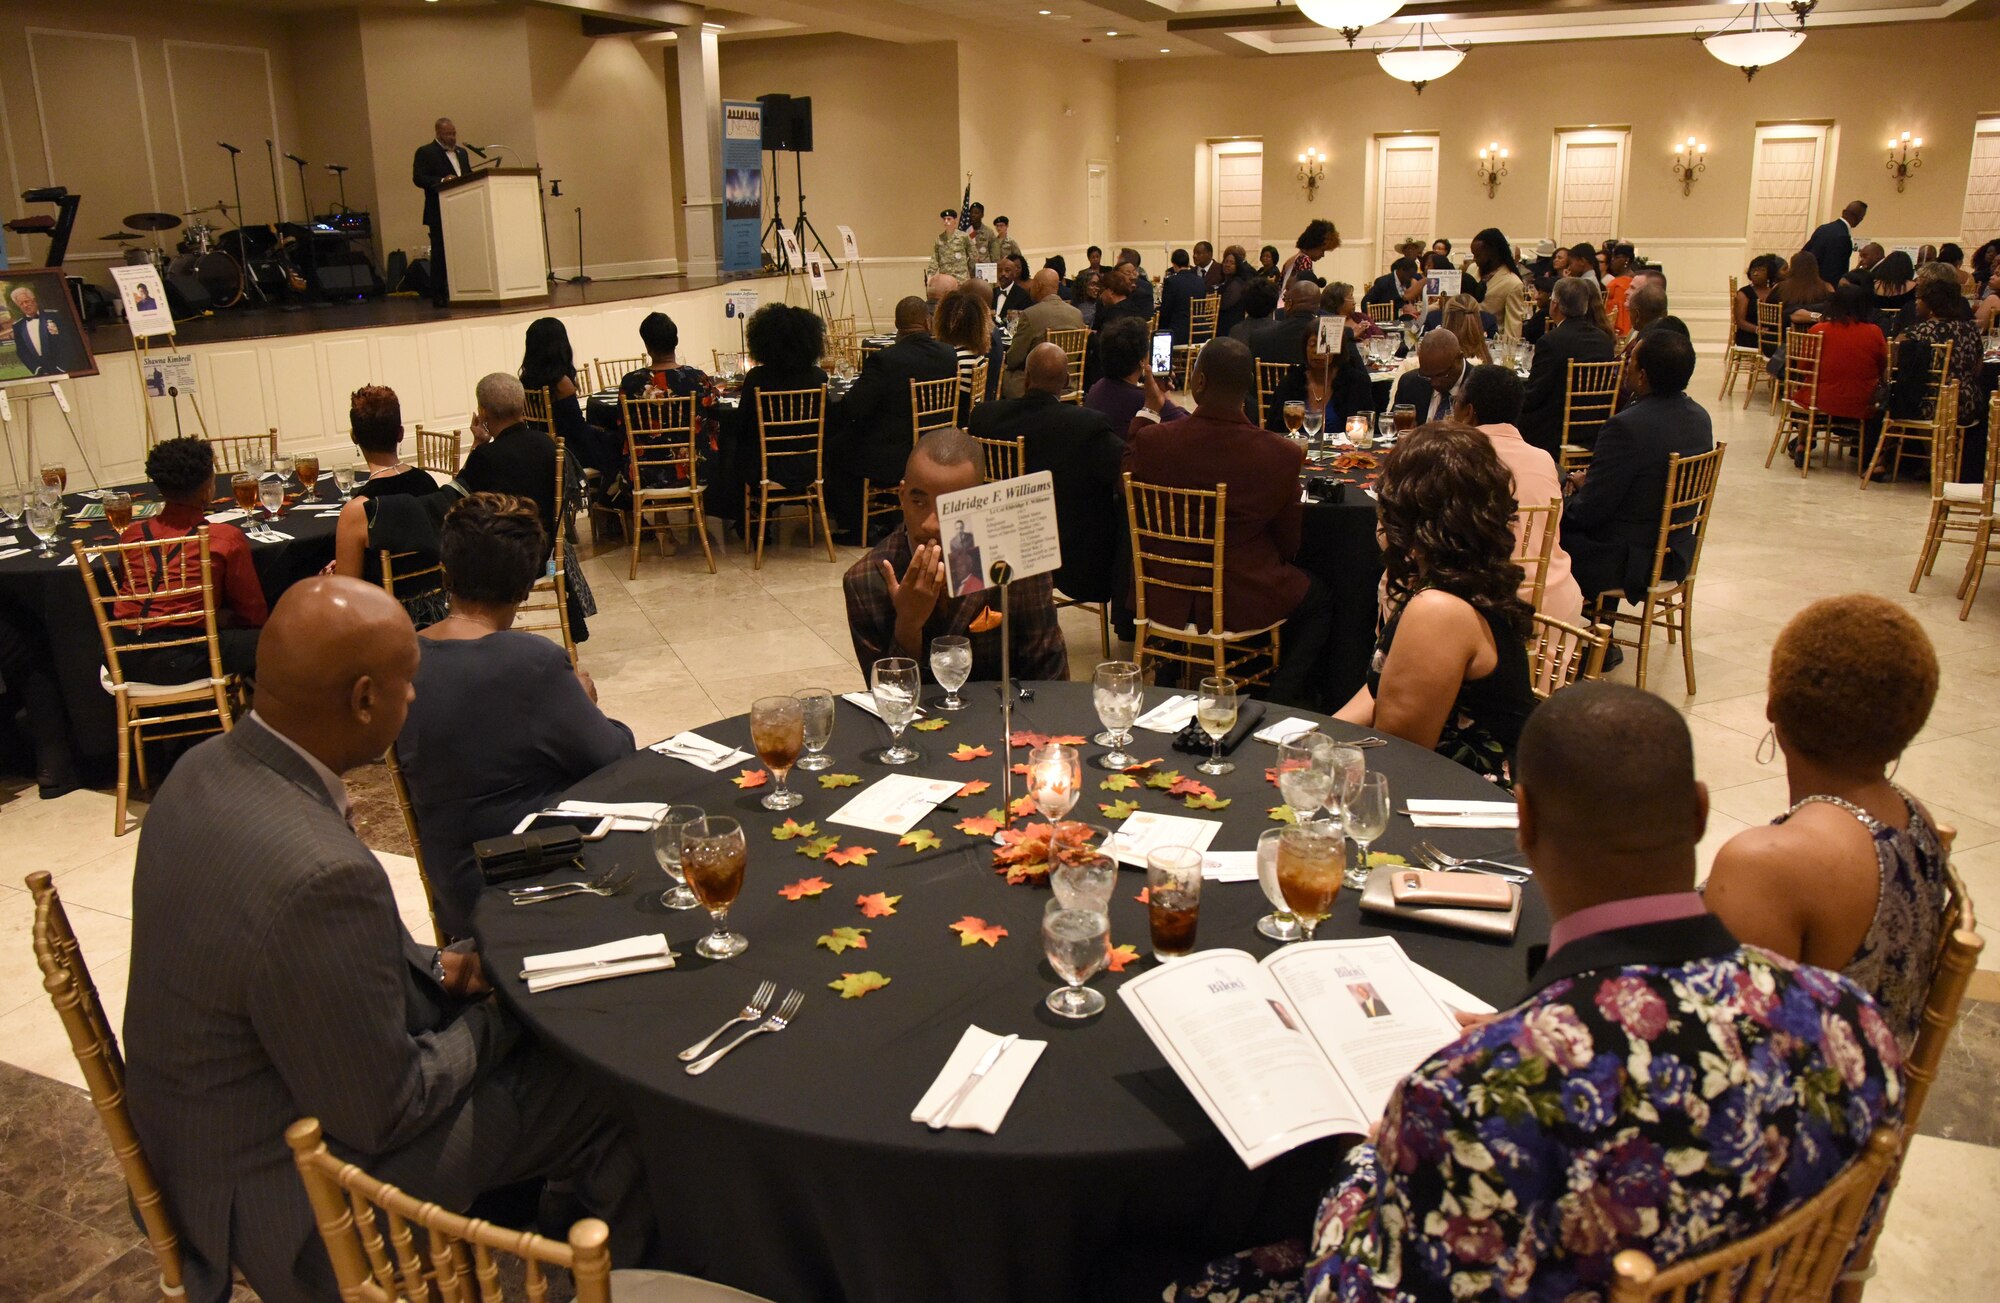 Keesler personnel and community members attend the Tuskegee Airmen Inc. 8th Annual Benefit Gala at the Slavonian Lodge Nov. 4, 2017, in Biloxi, Mississippi. The event, which was held to raise funds for the Col. Lawrence E. Roberts Scholarships Fund, also included a silent auction and dinner. The gala’s theme was “We weren’t assigned, we were requested.” (U.S. Air Force photo by Kemberly Groue)